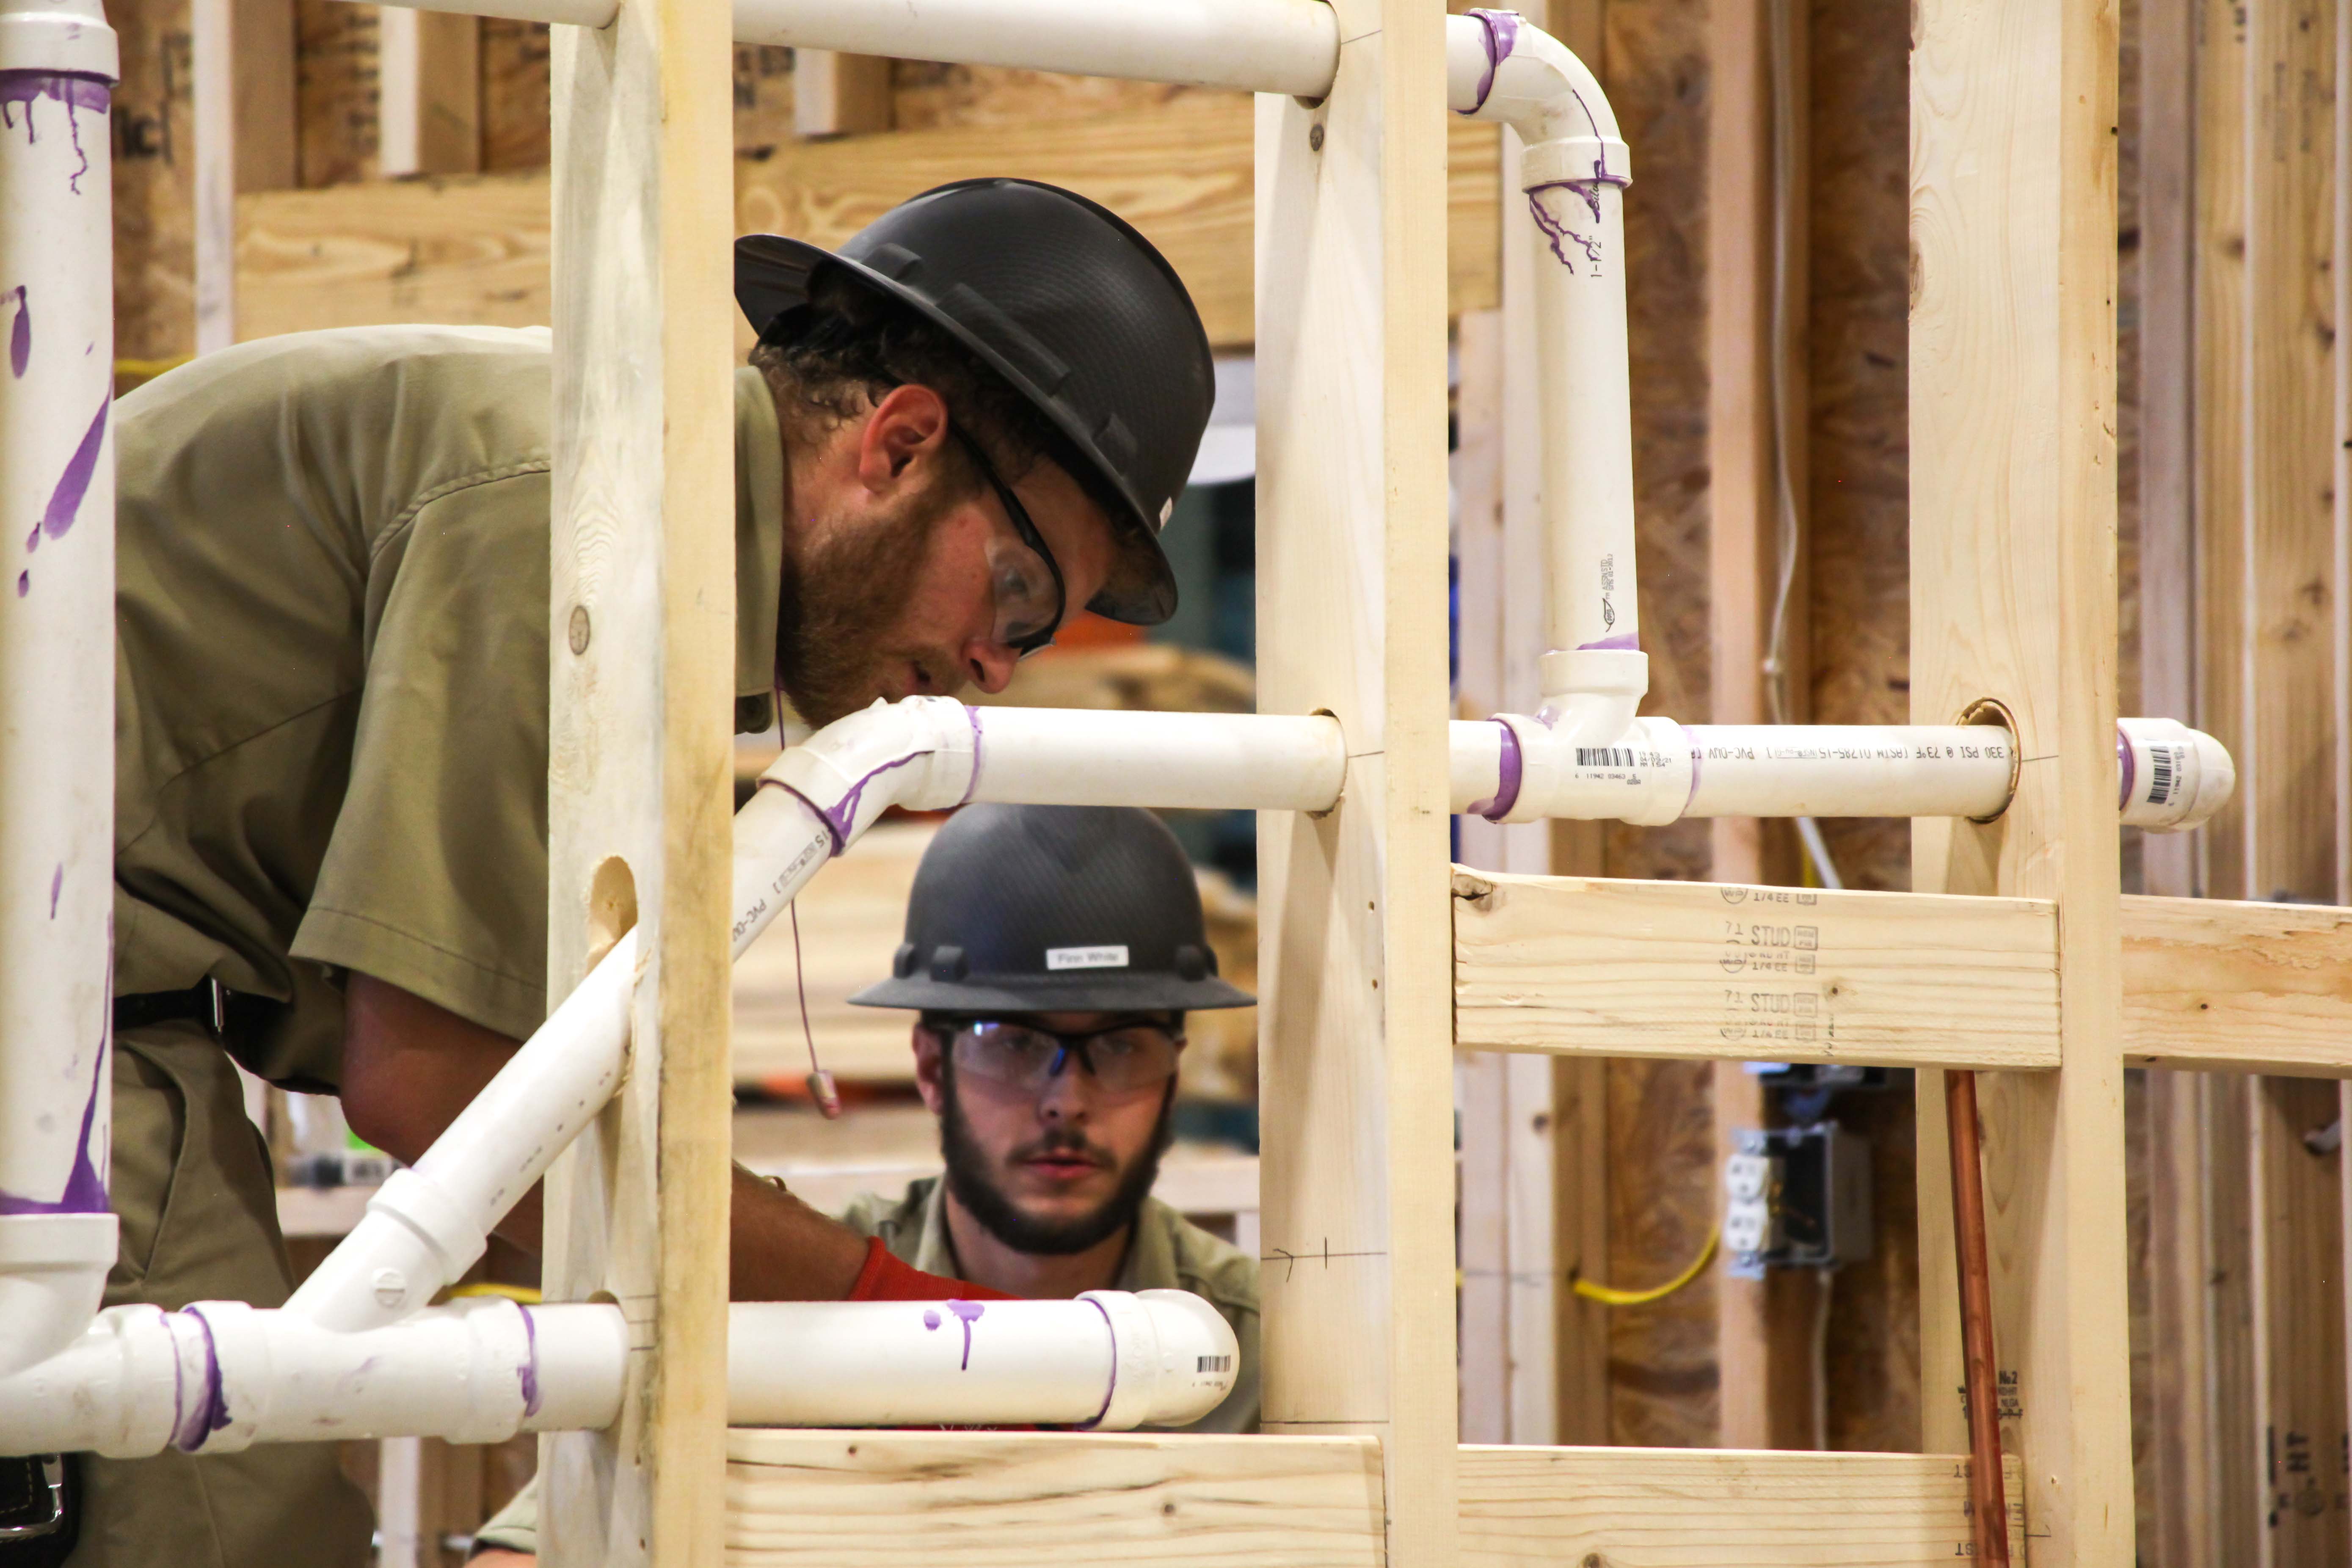 GNTC student Trey Posey (left) works alongside teammate Finn White during the TeamWorks competition for the SkillsUSA National Leadership and Skills Conference earlier this month. The event challenged the team’s carpentry, masonry, plumbing and electrical abilities.